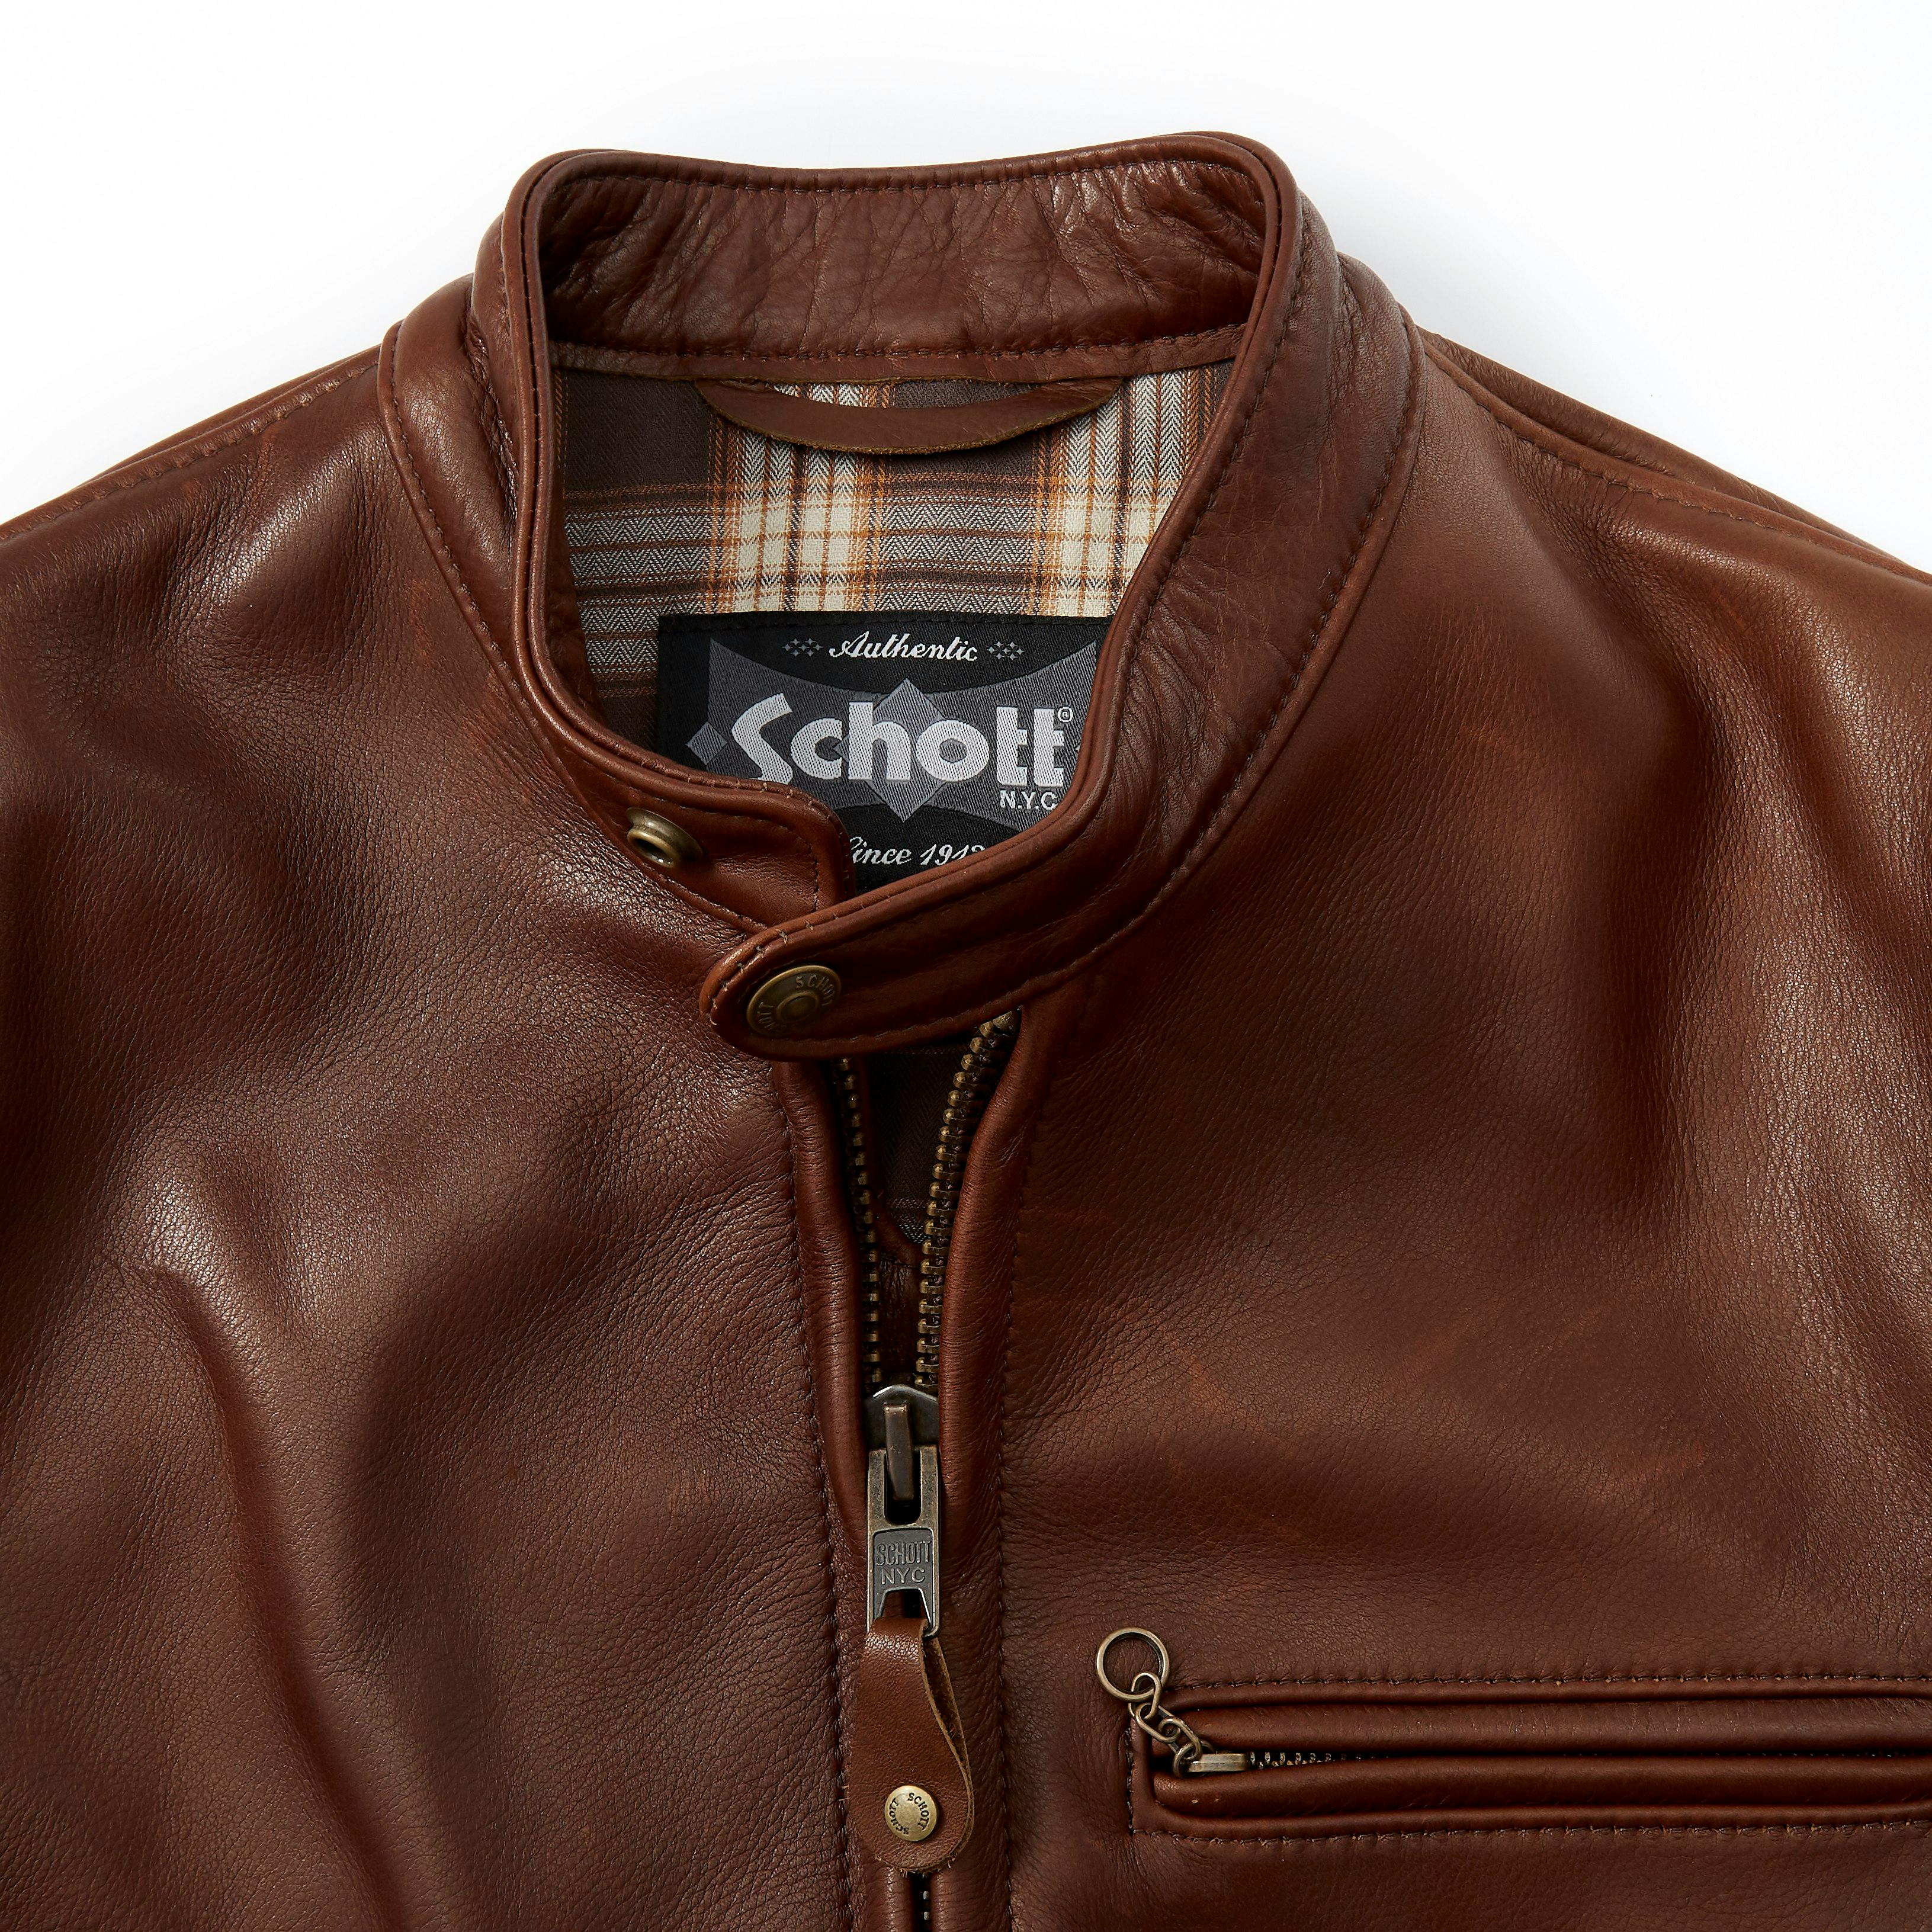 Schott NYC Waxed Natural Pebbled Cowhide Café Leather Jacket (530) - Men's  Clothing, Traditional Natural shouldered clothing, preppy apparel